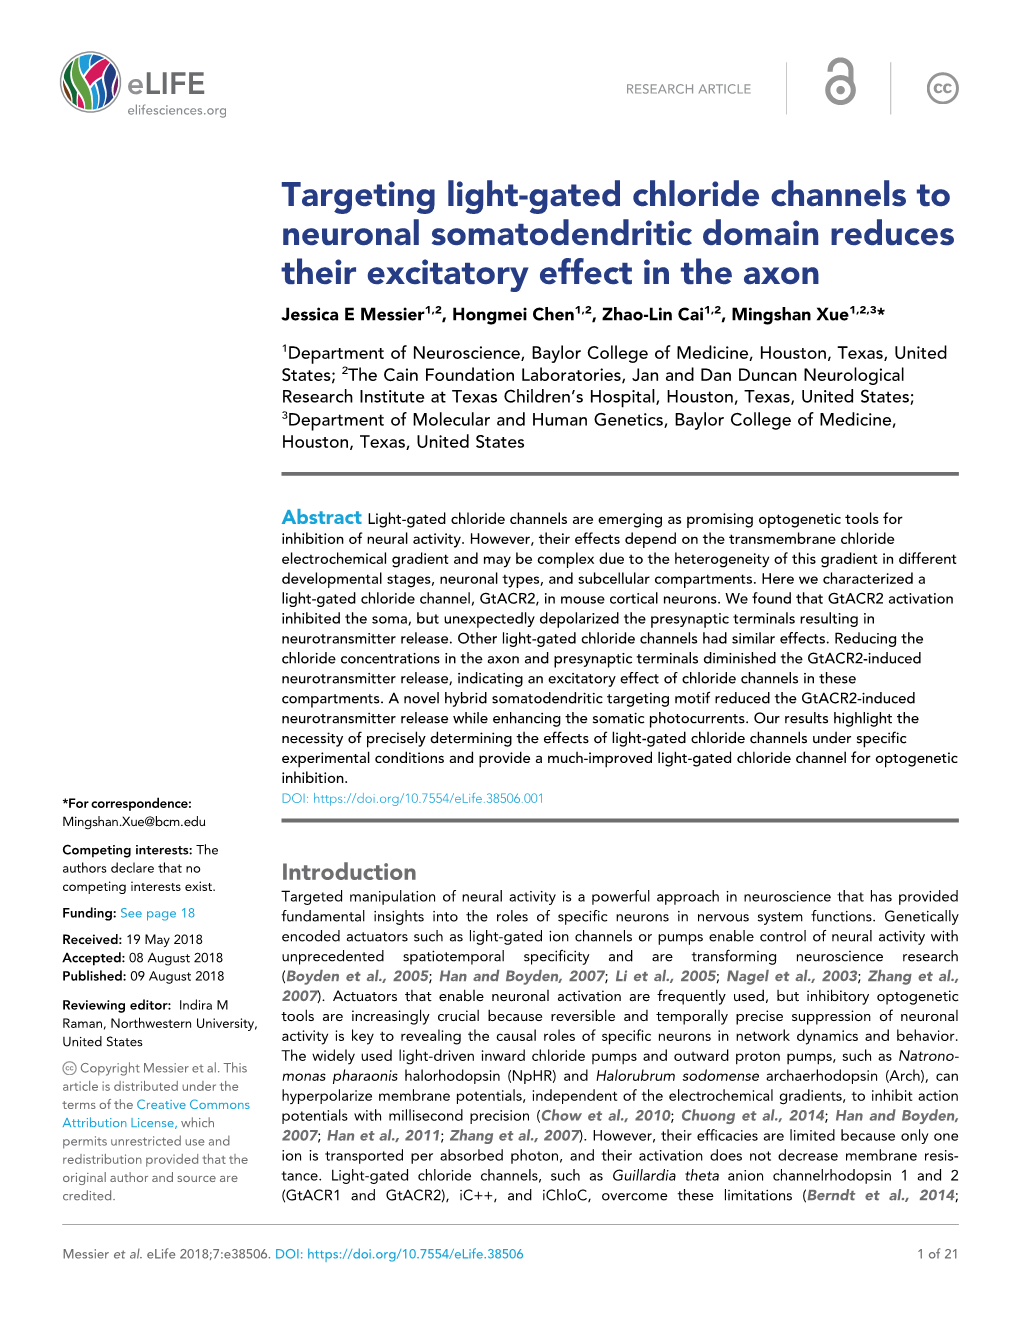 Targeting Light-Gated Chloride Channels to Neuronal